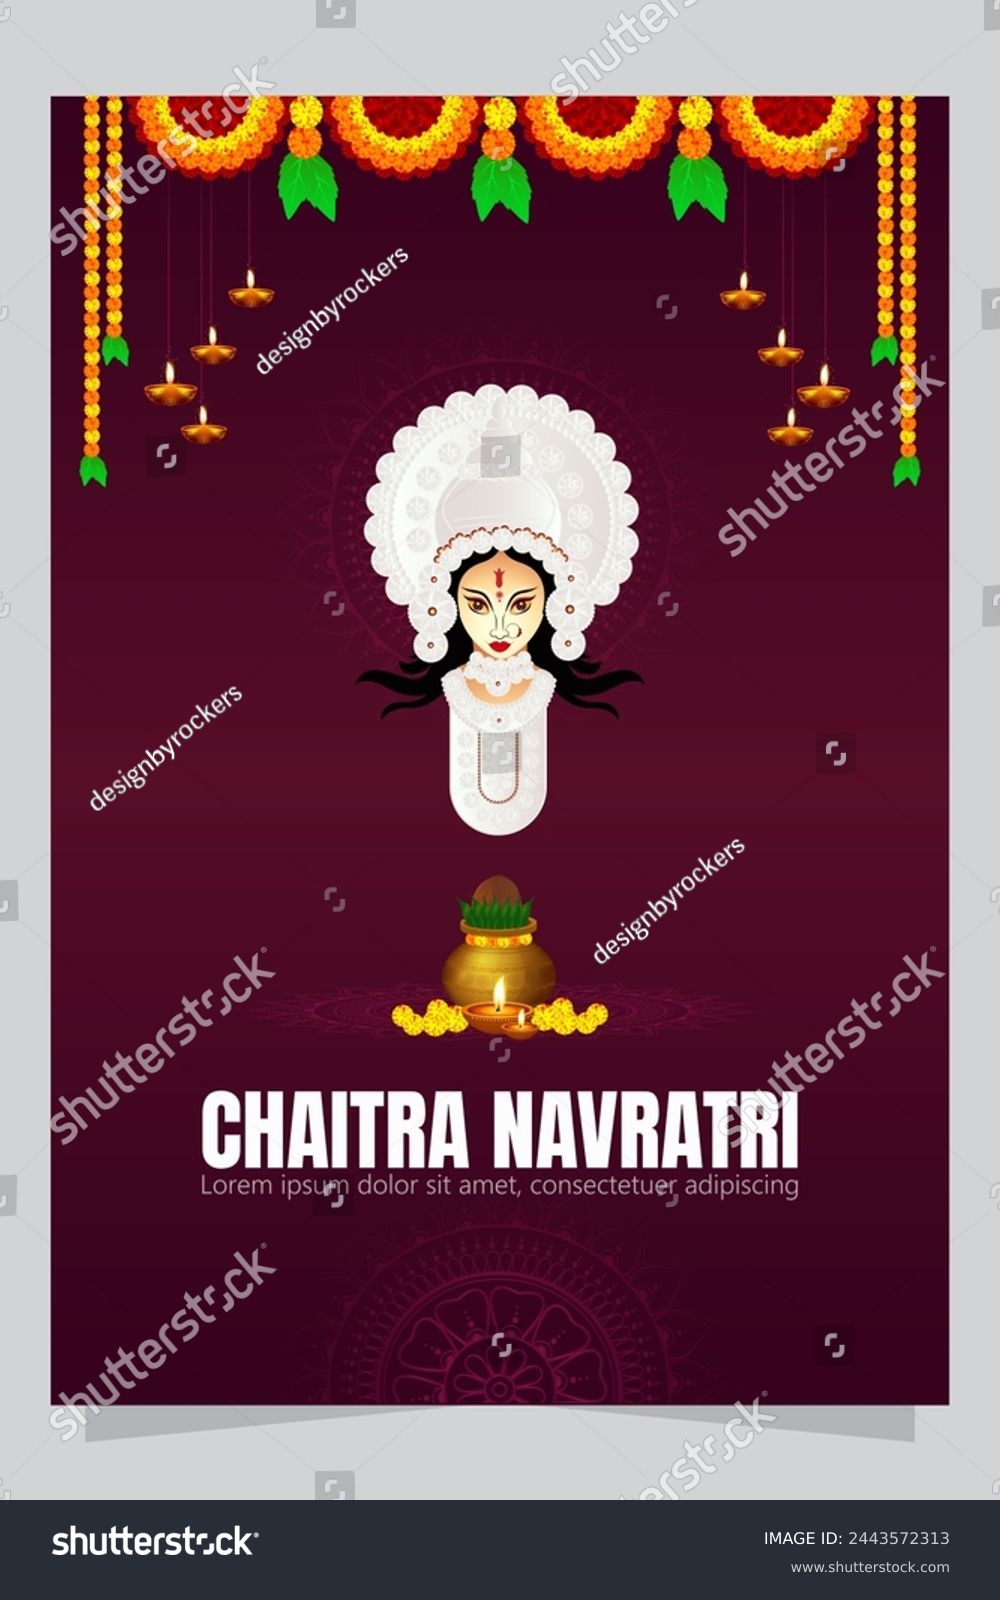 SVG of Chaitra Navratri is a Hindu festival celebrated for nine days in the Hindu lunar month of Chaitra (March-April). svg